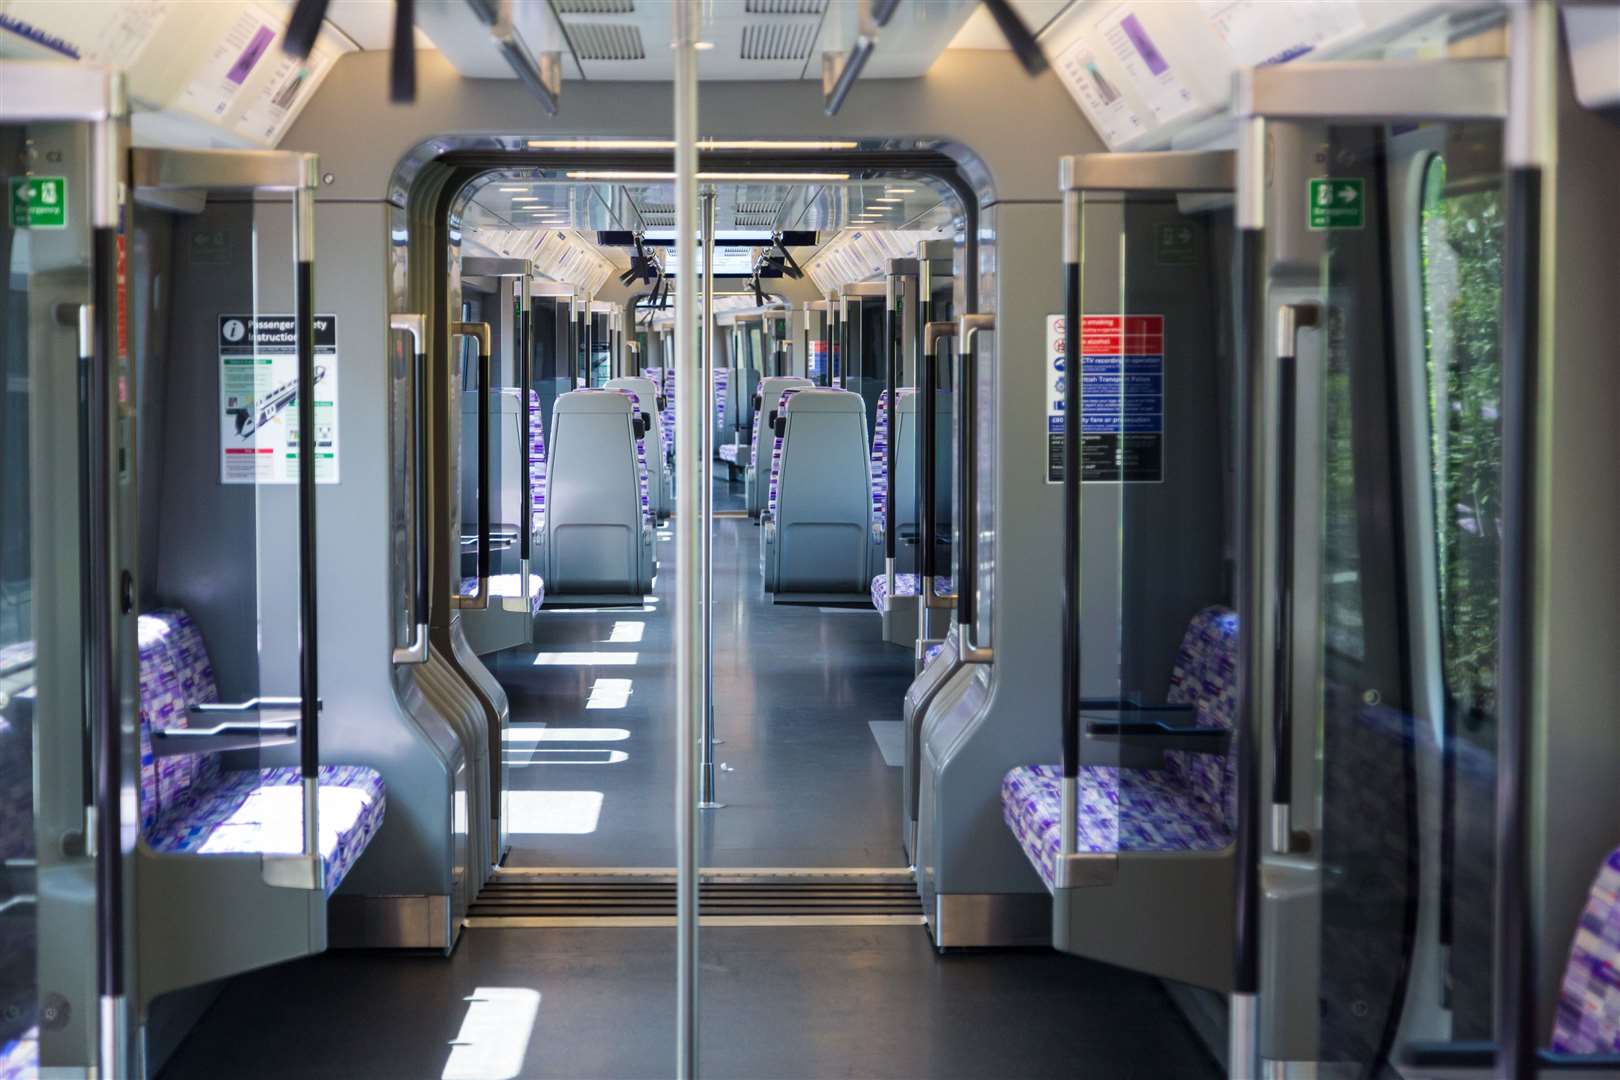 There will be new walk-through trains